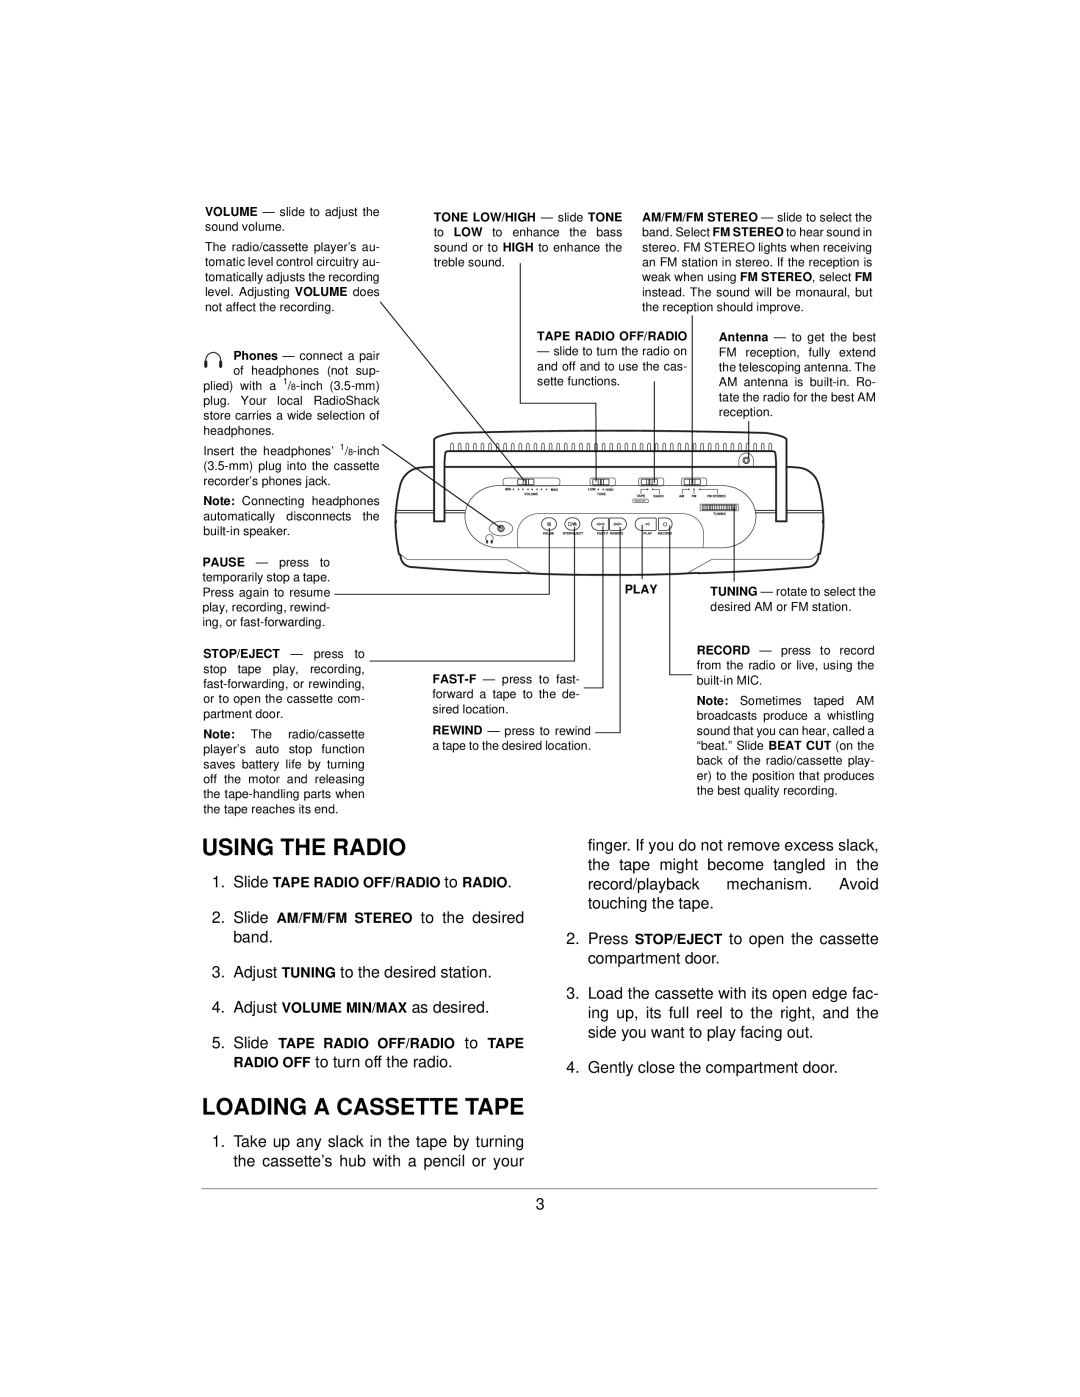 Radio Shack SCR-65 specifications Using The Radio, Loading A Cassette Tape 